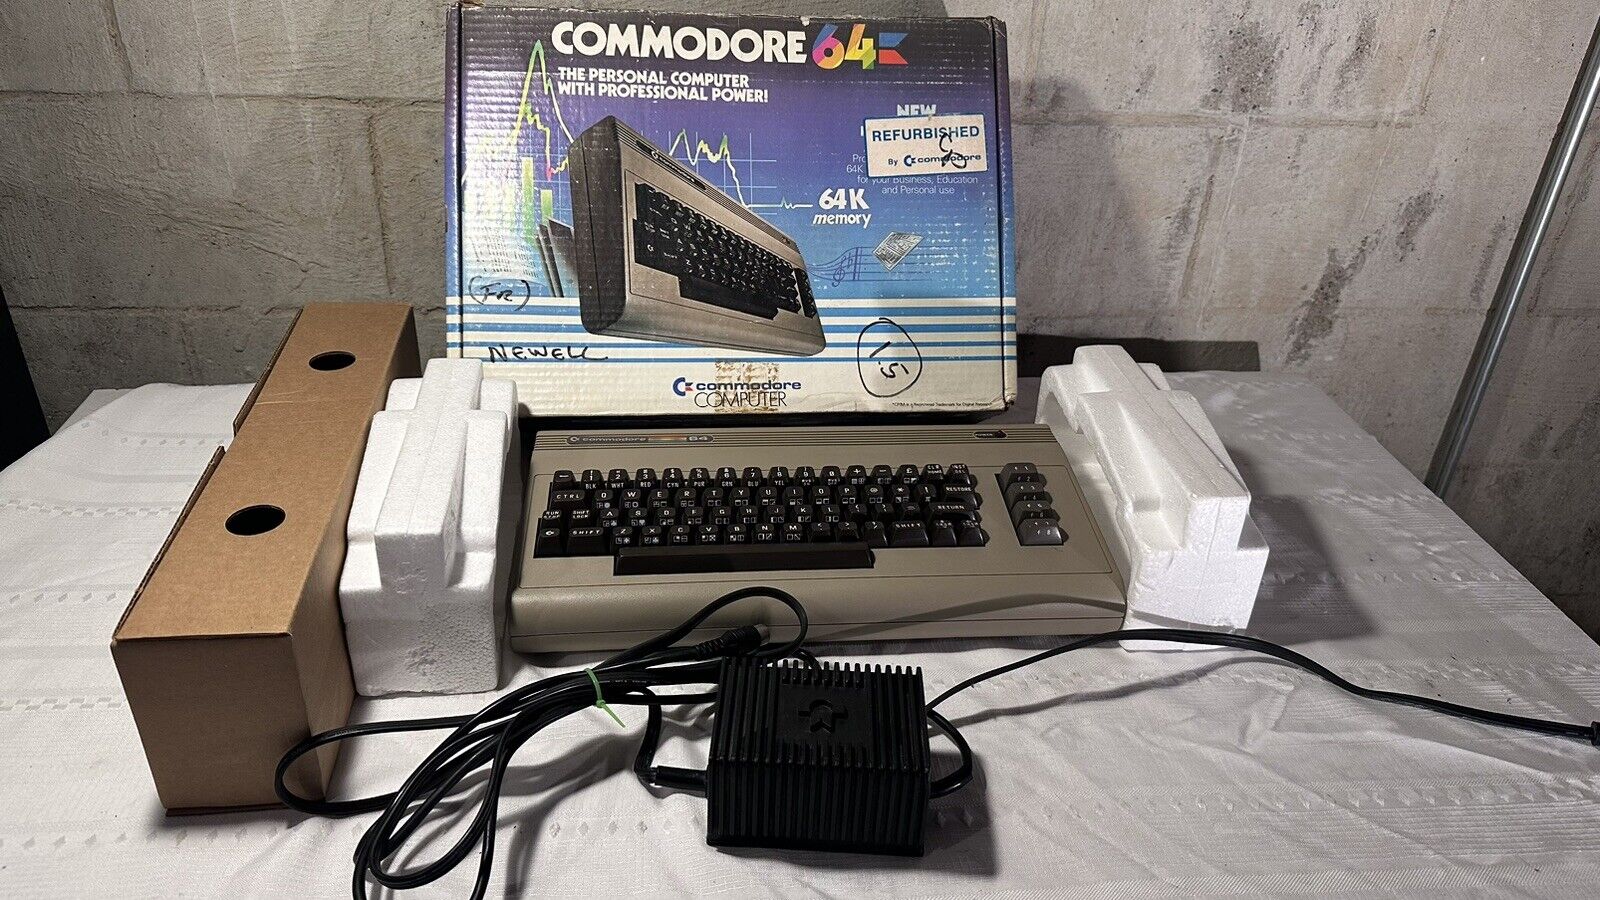 Retro Restored Commodore 64 Computer System Tested Vintage 1980s C64 In Box